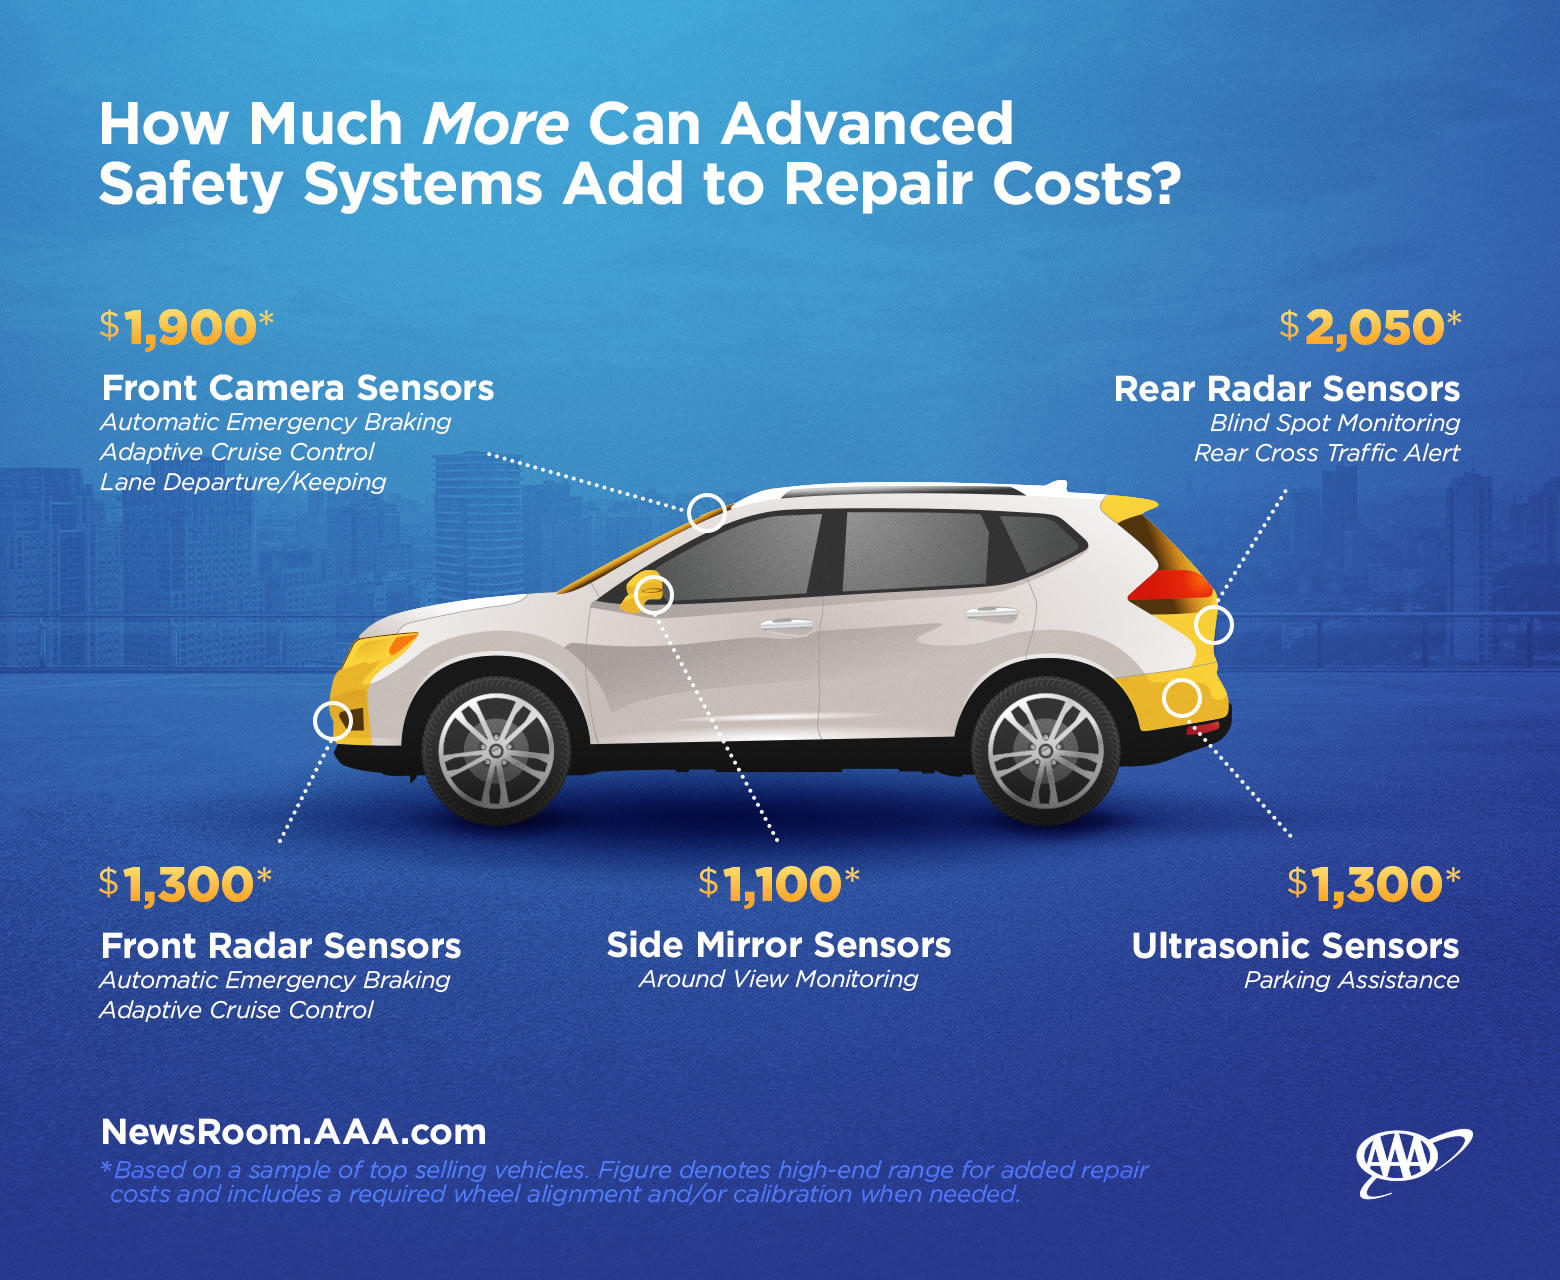 AAA: Save Now to Cover Higher Car Repair Costs - Aaa Car Repair Cost Hike ADvanceD Tech ADas1